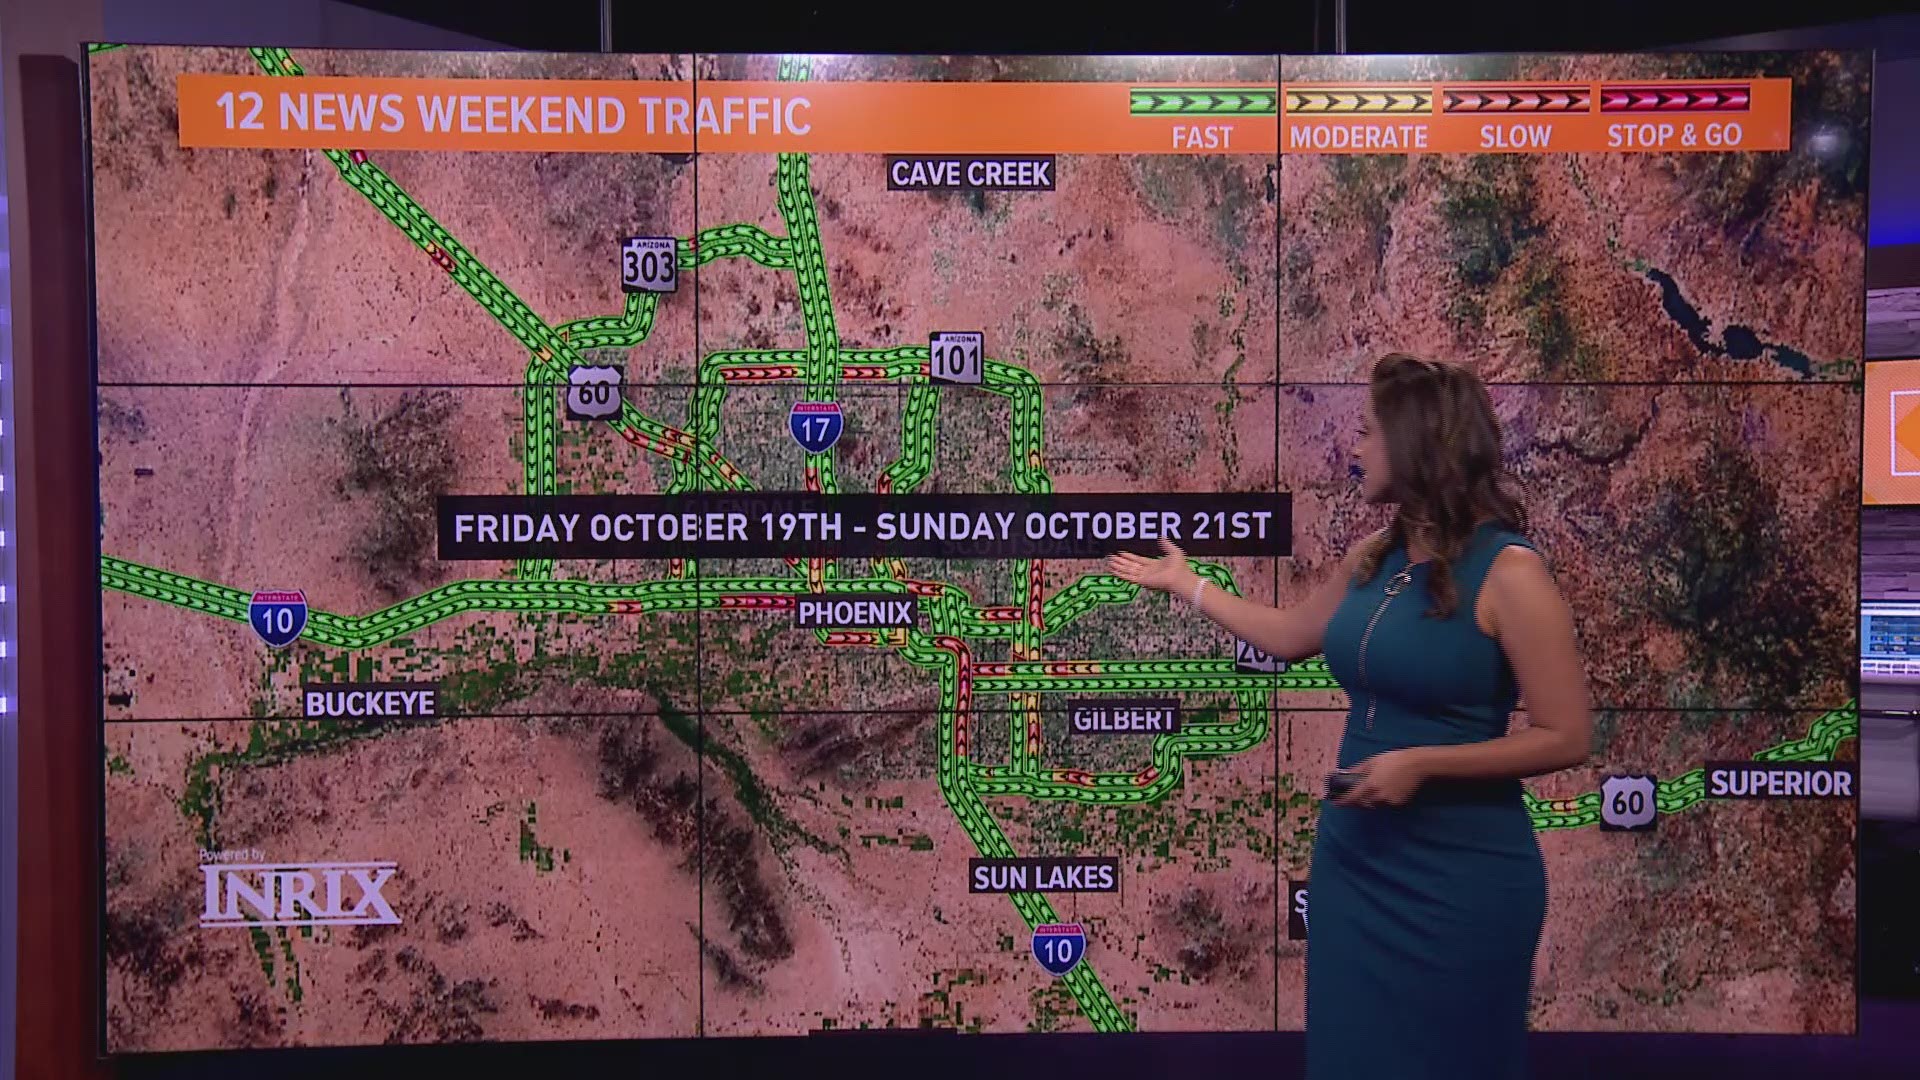 Here's your weekend traffic outlook for 10/19/18-10/21/18